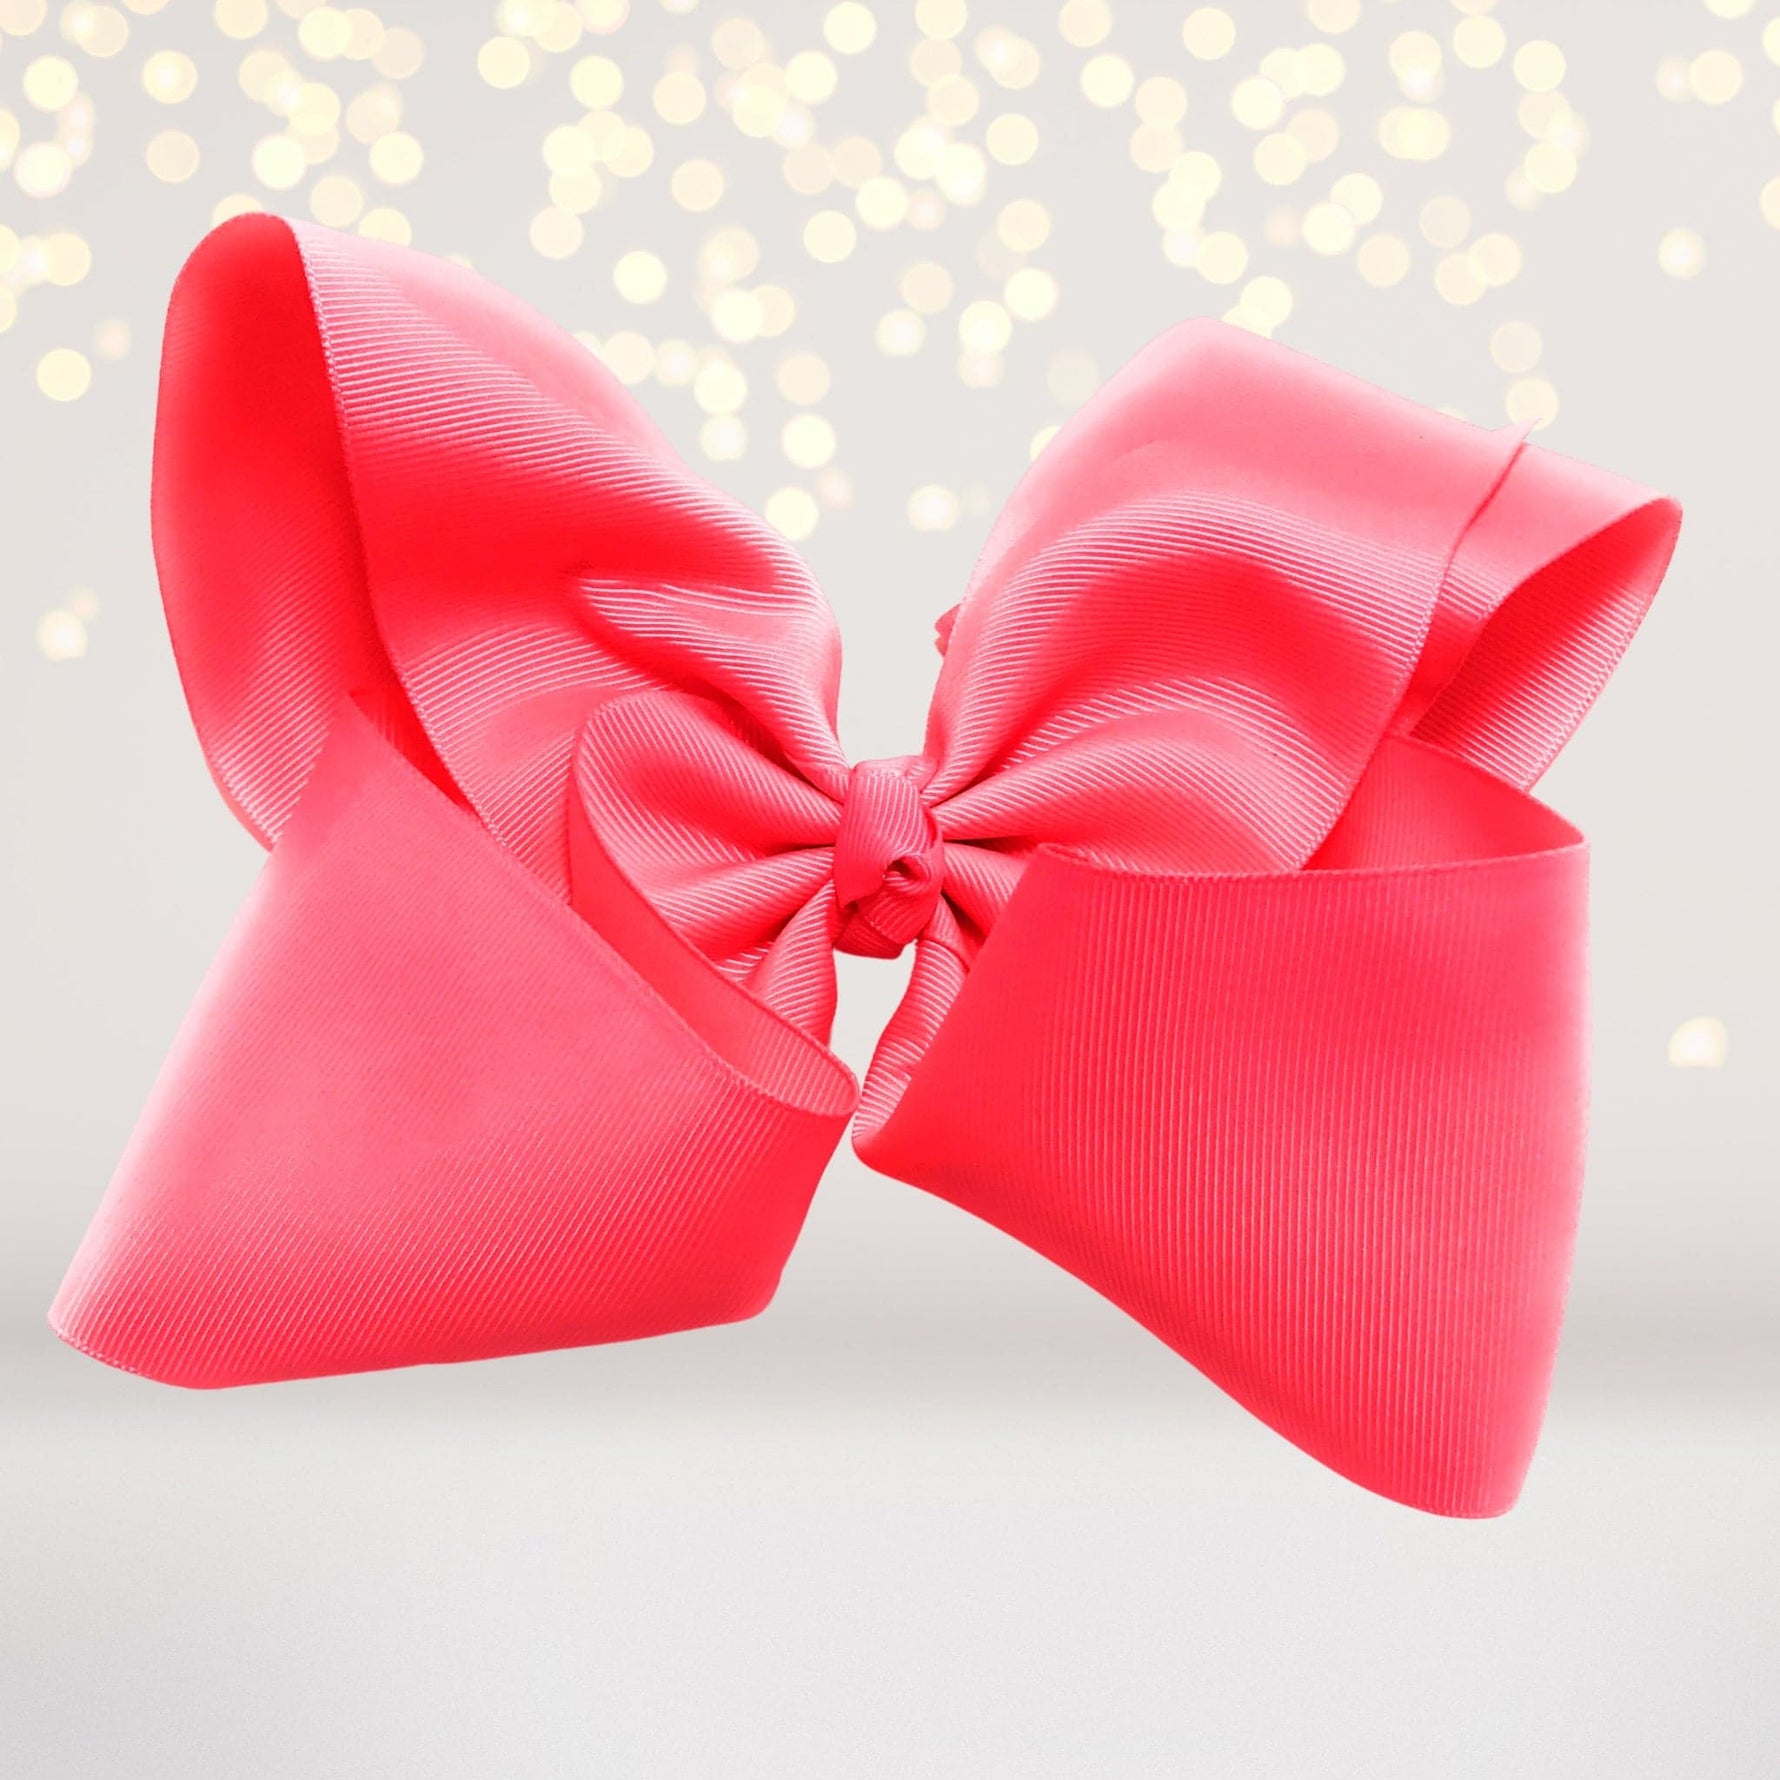 Passion Pink Neon big bows for hair, girls hair bow, accessories for hair, basic 8 inch hair bow